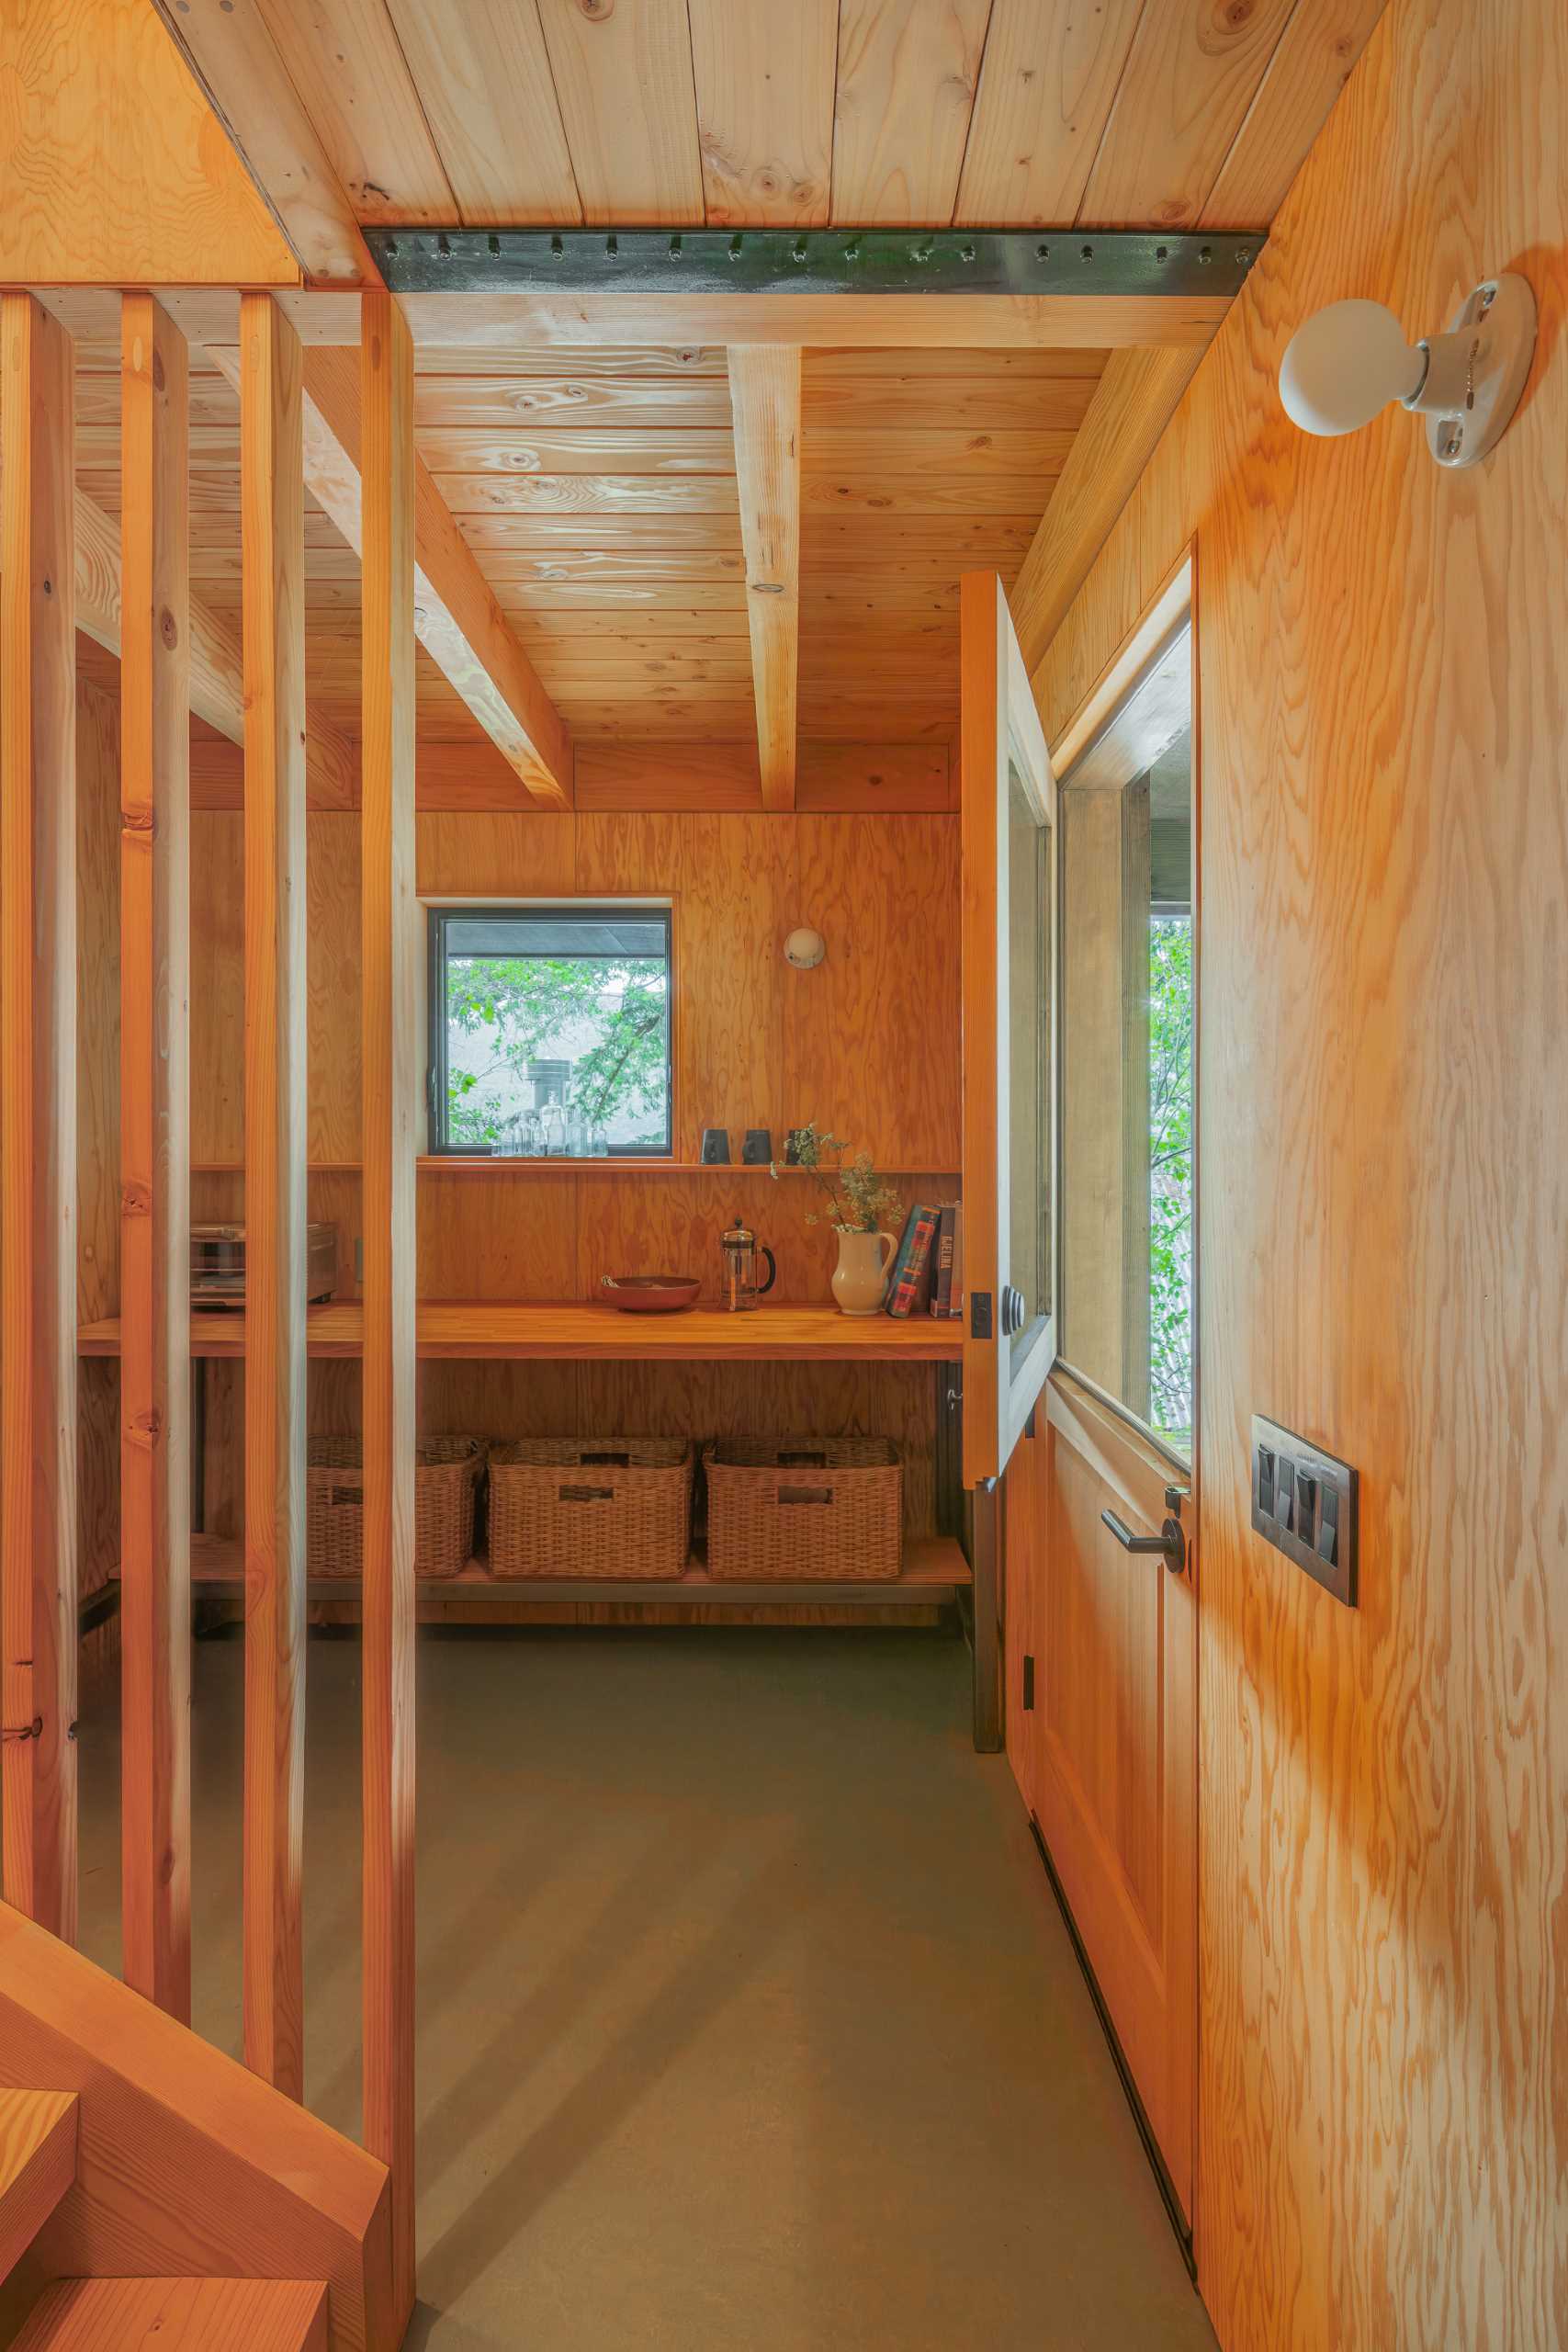 A Dutch door creates a casual entrance to the cabin. Inside the wood-lined cabin, there's a wall with storage, while the floor is finished in a sage green.